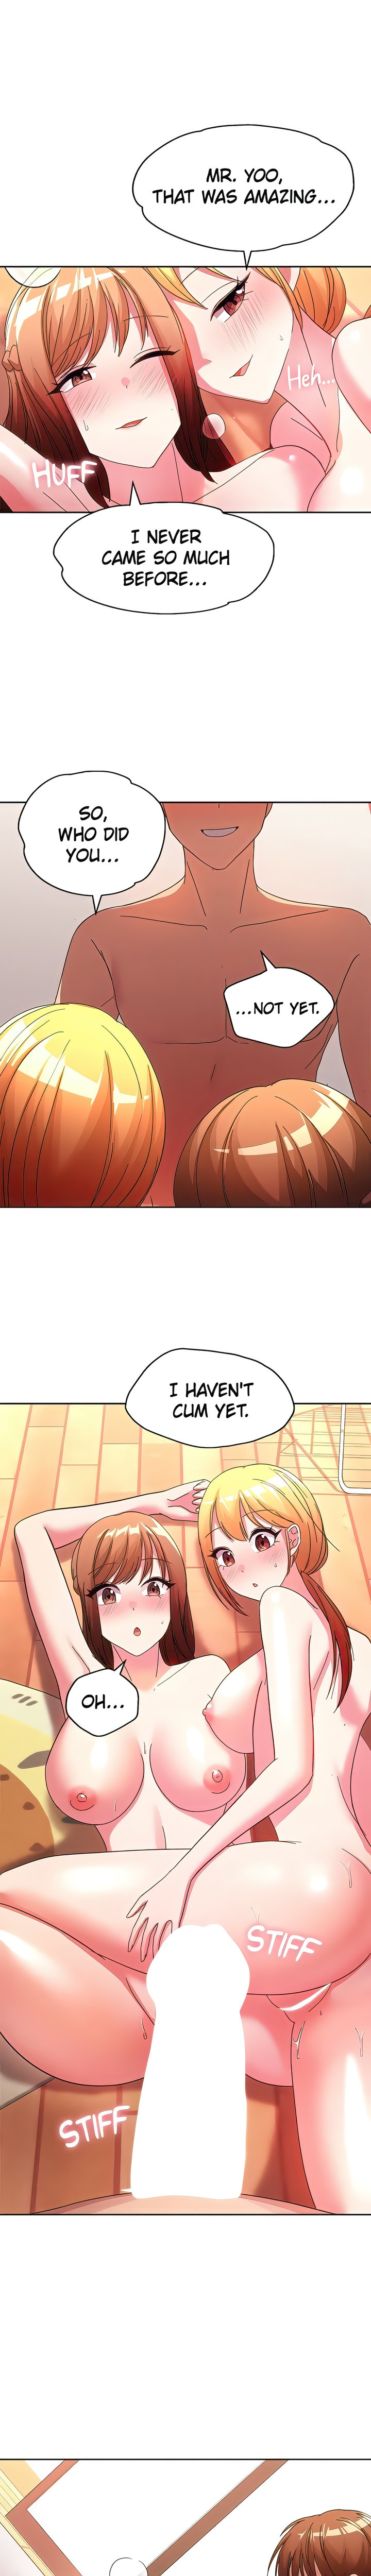 Girls I Used to Teach - Chapter 34 Page 1